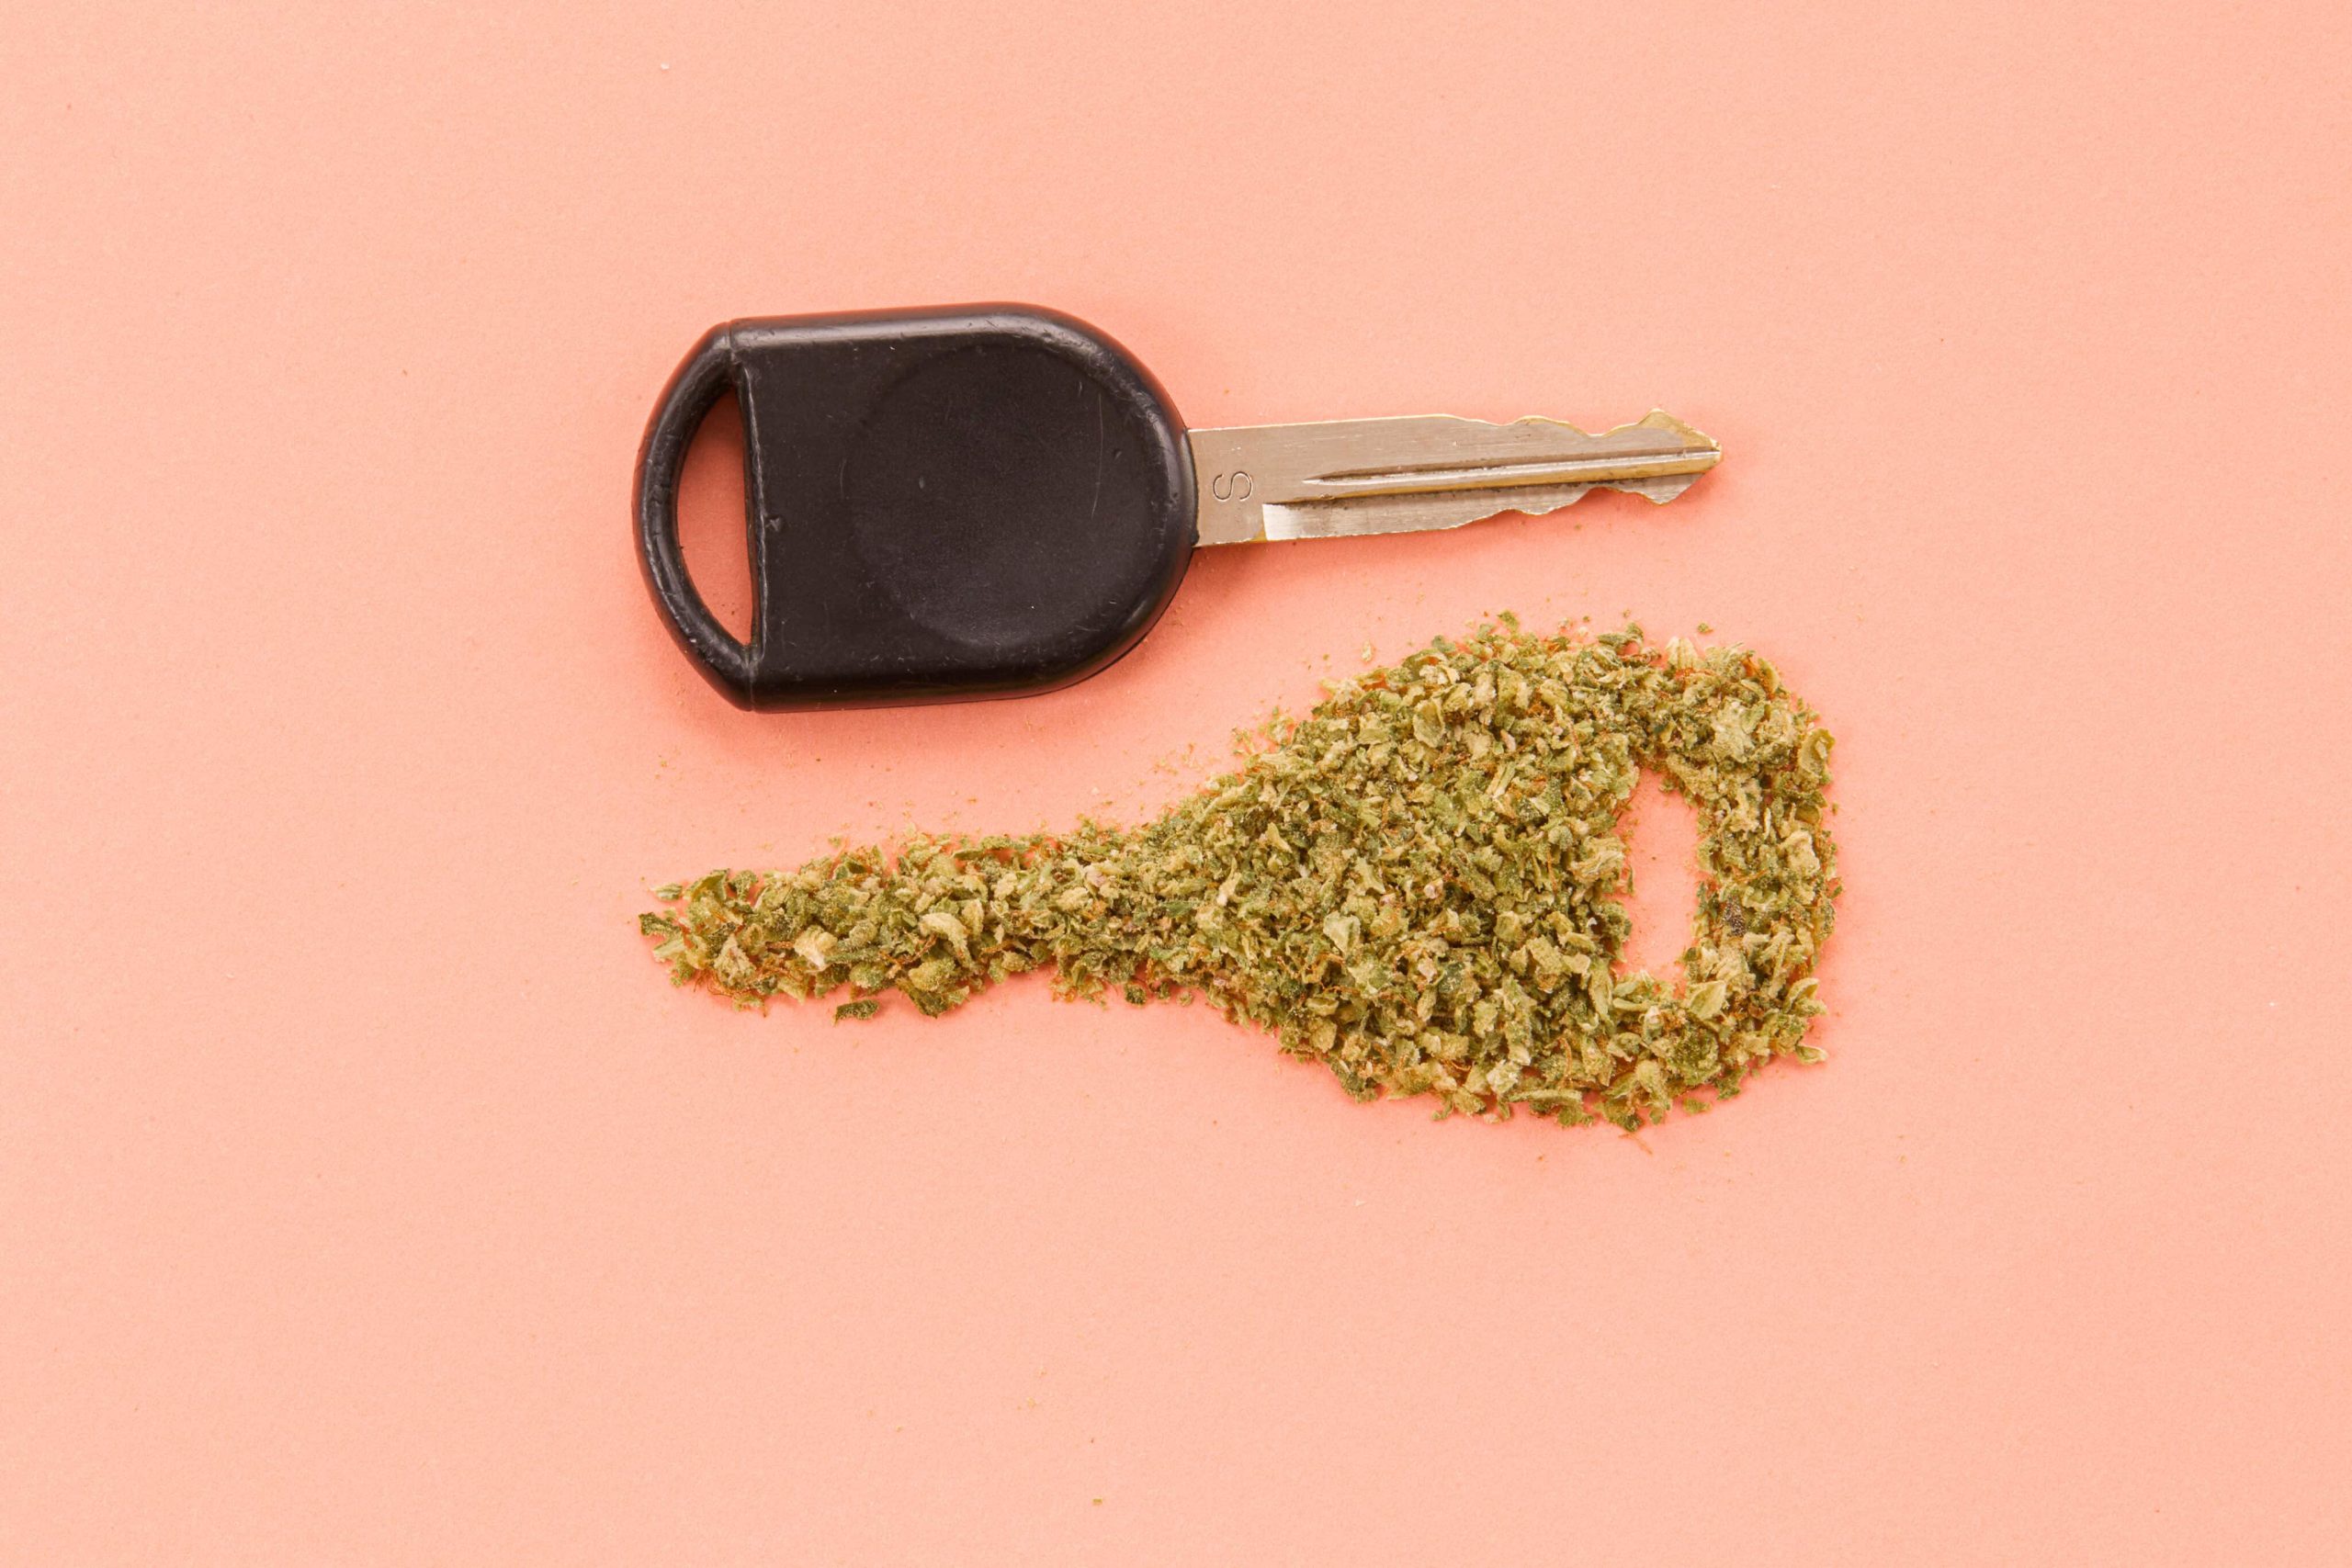 Weed Legalization in Canada Not Linked to Increase in Car Crashes